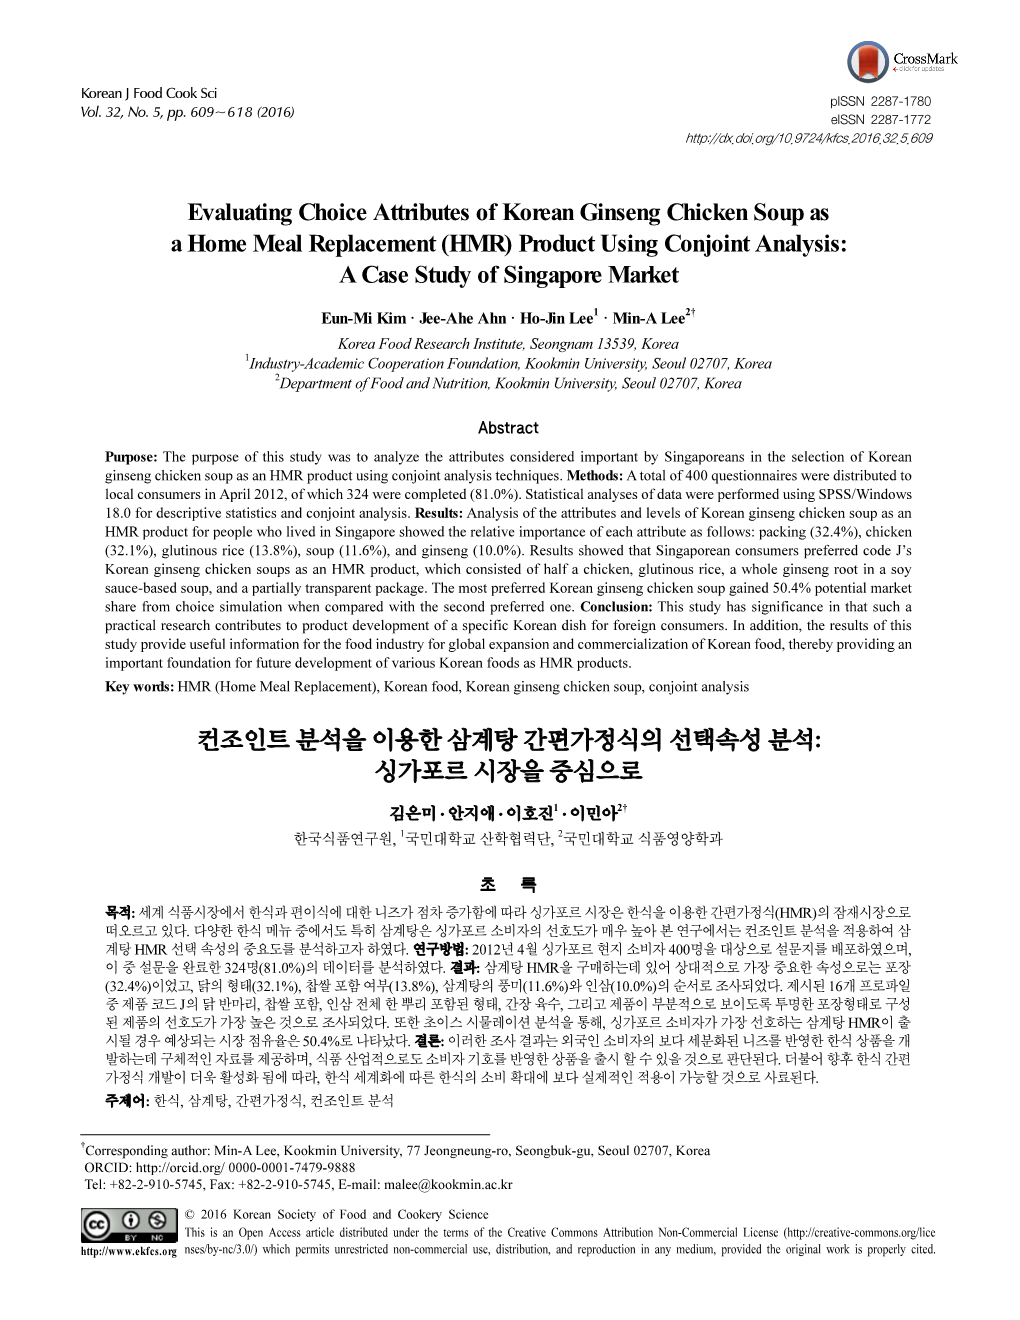 Evaluating Choice Attributes of Korean Ginseng Chicken Soup As a Home Meal Replacement (HMR) Product Using Conjoint Analysis: a Case Study of Singapore Market